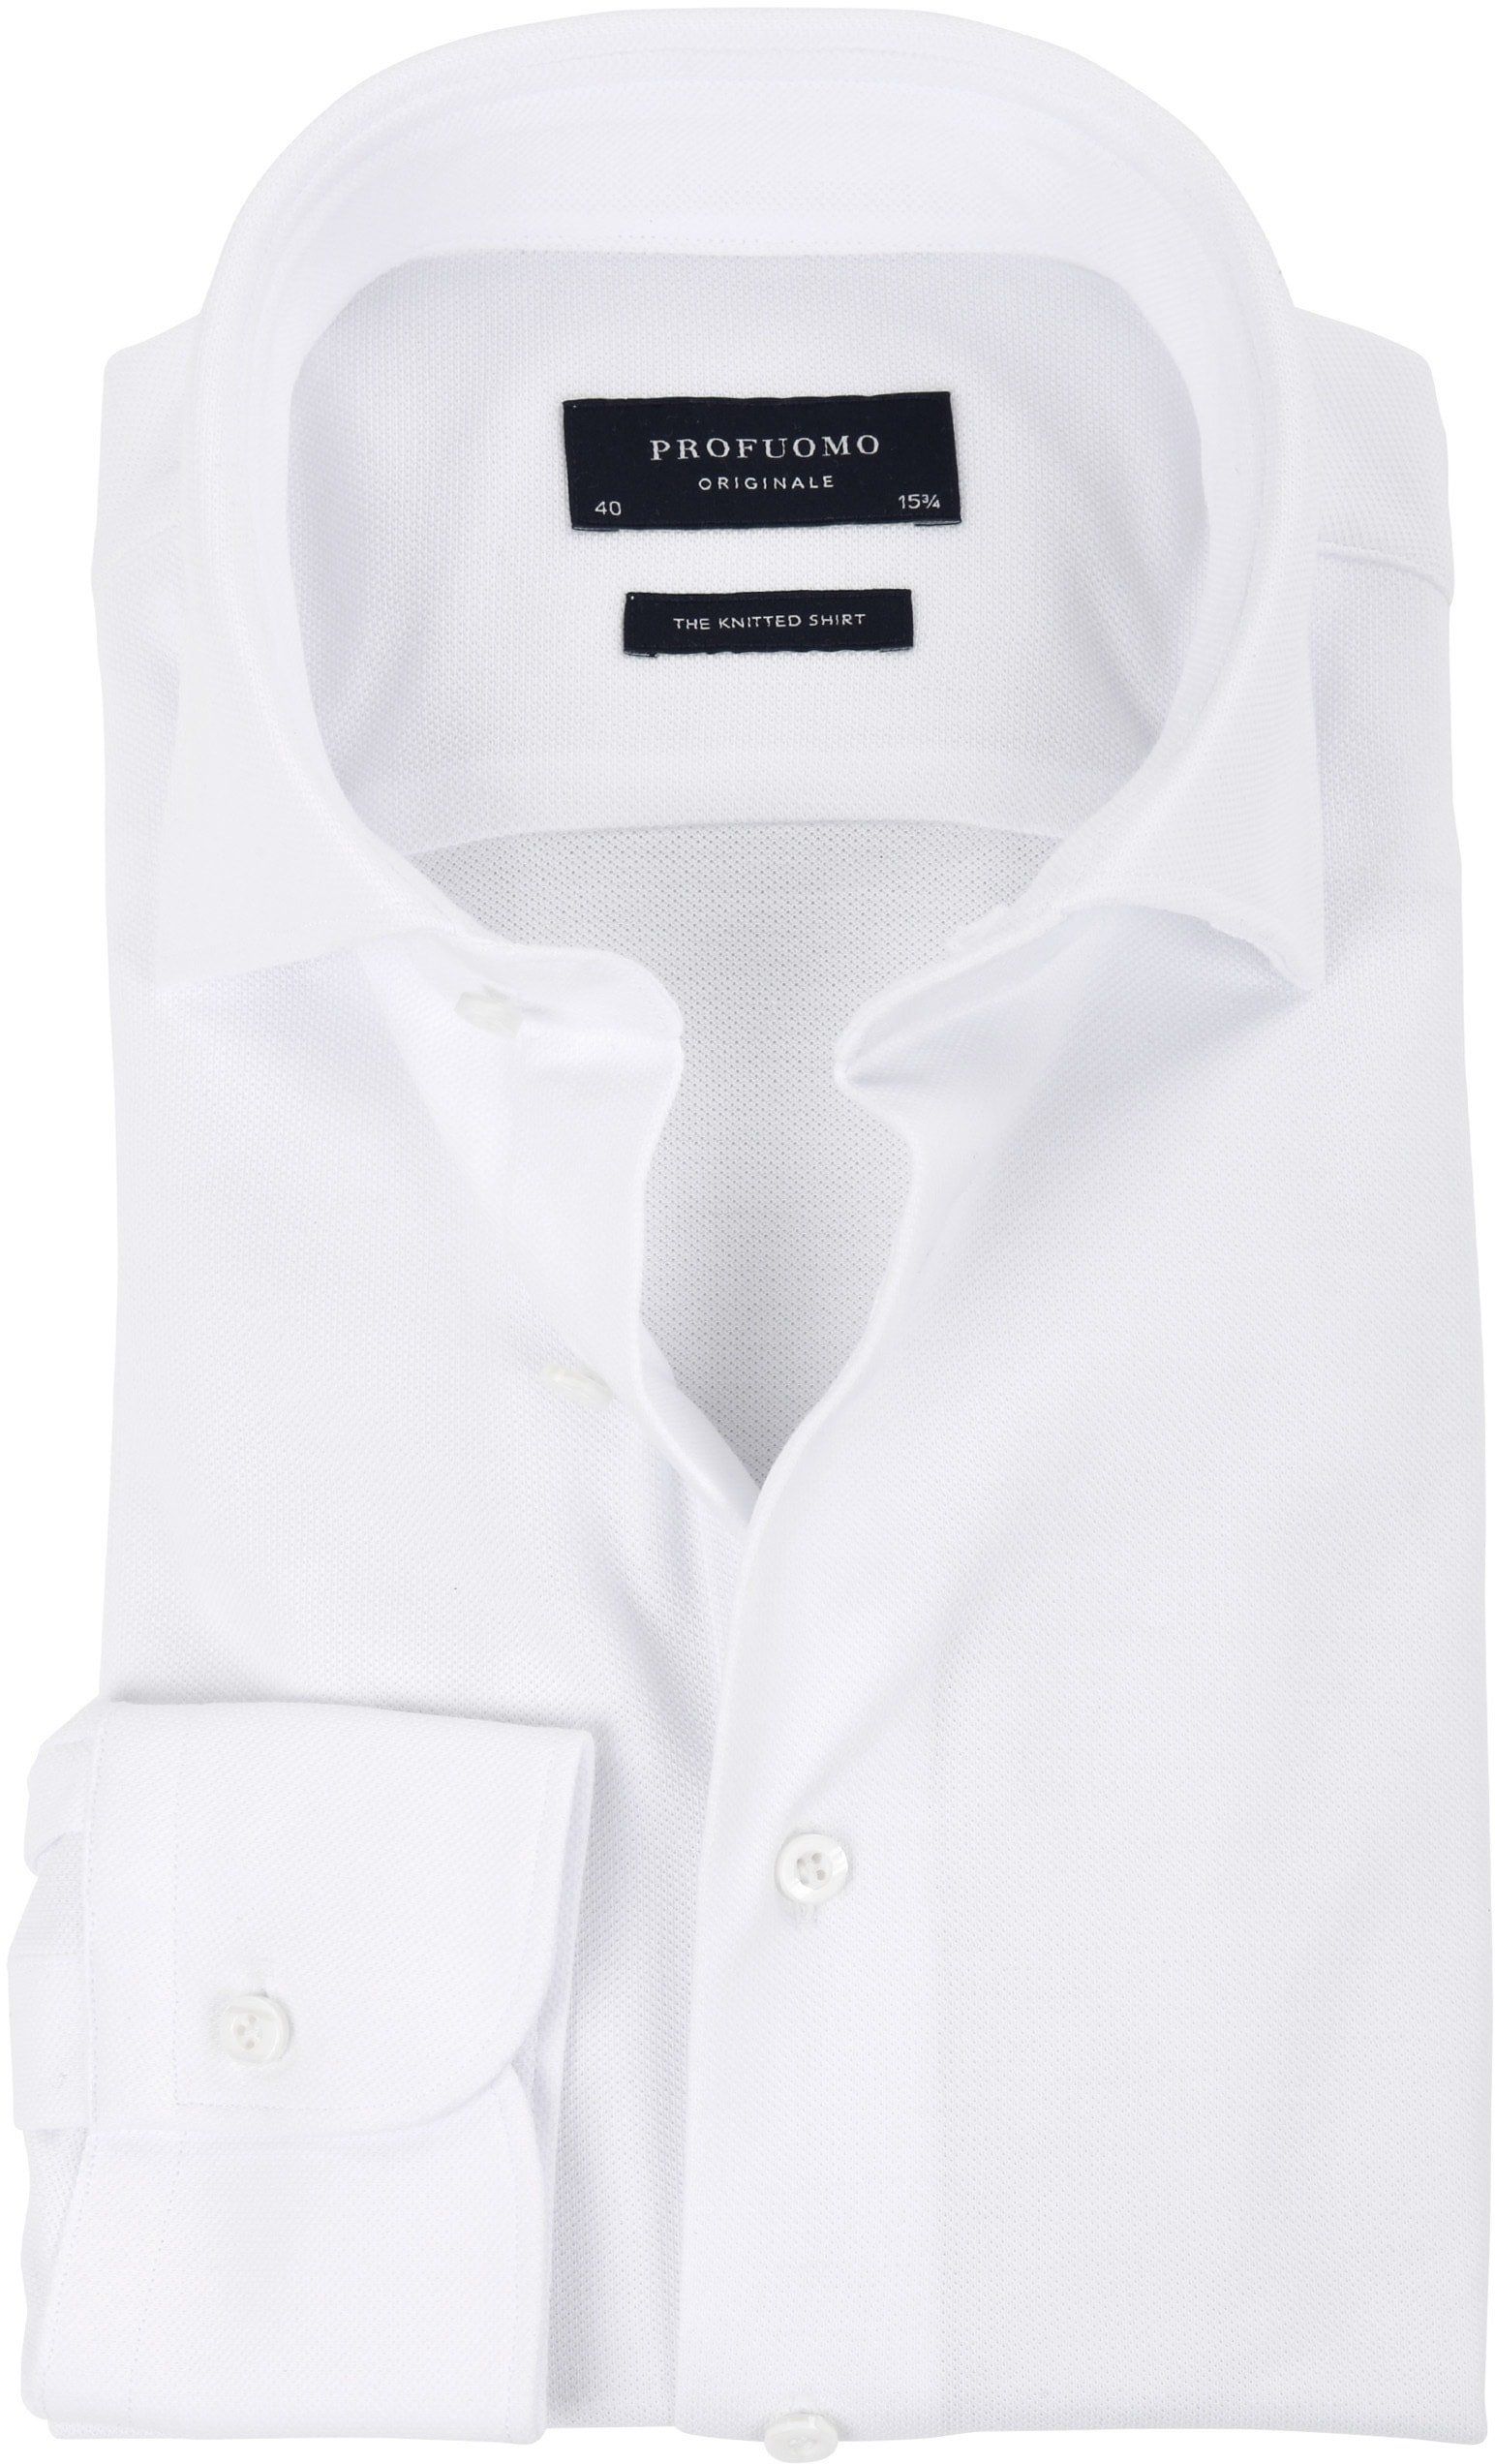 Profuomo Shirt Knitted WS White size 14.5